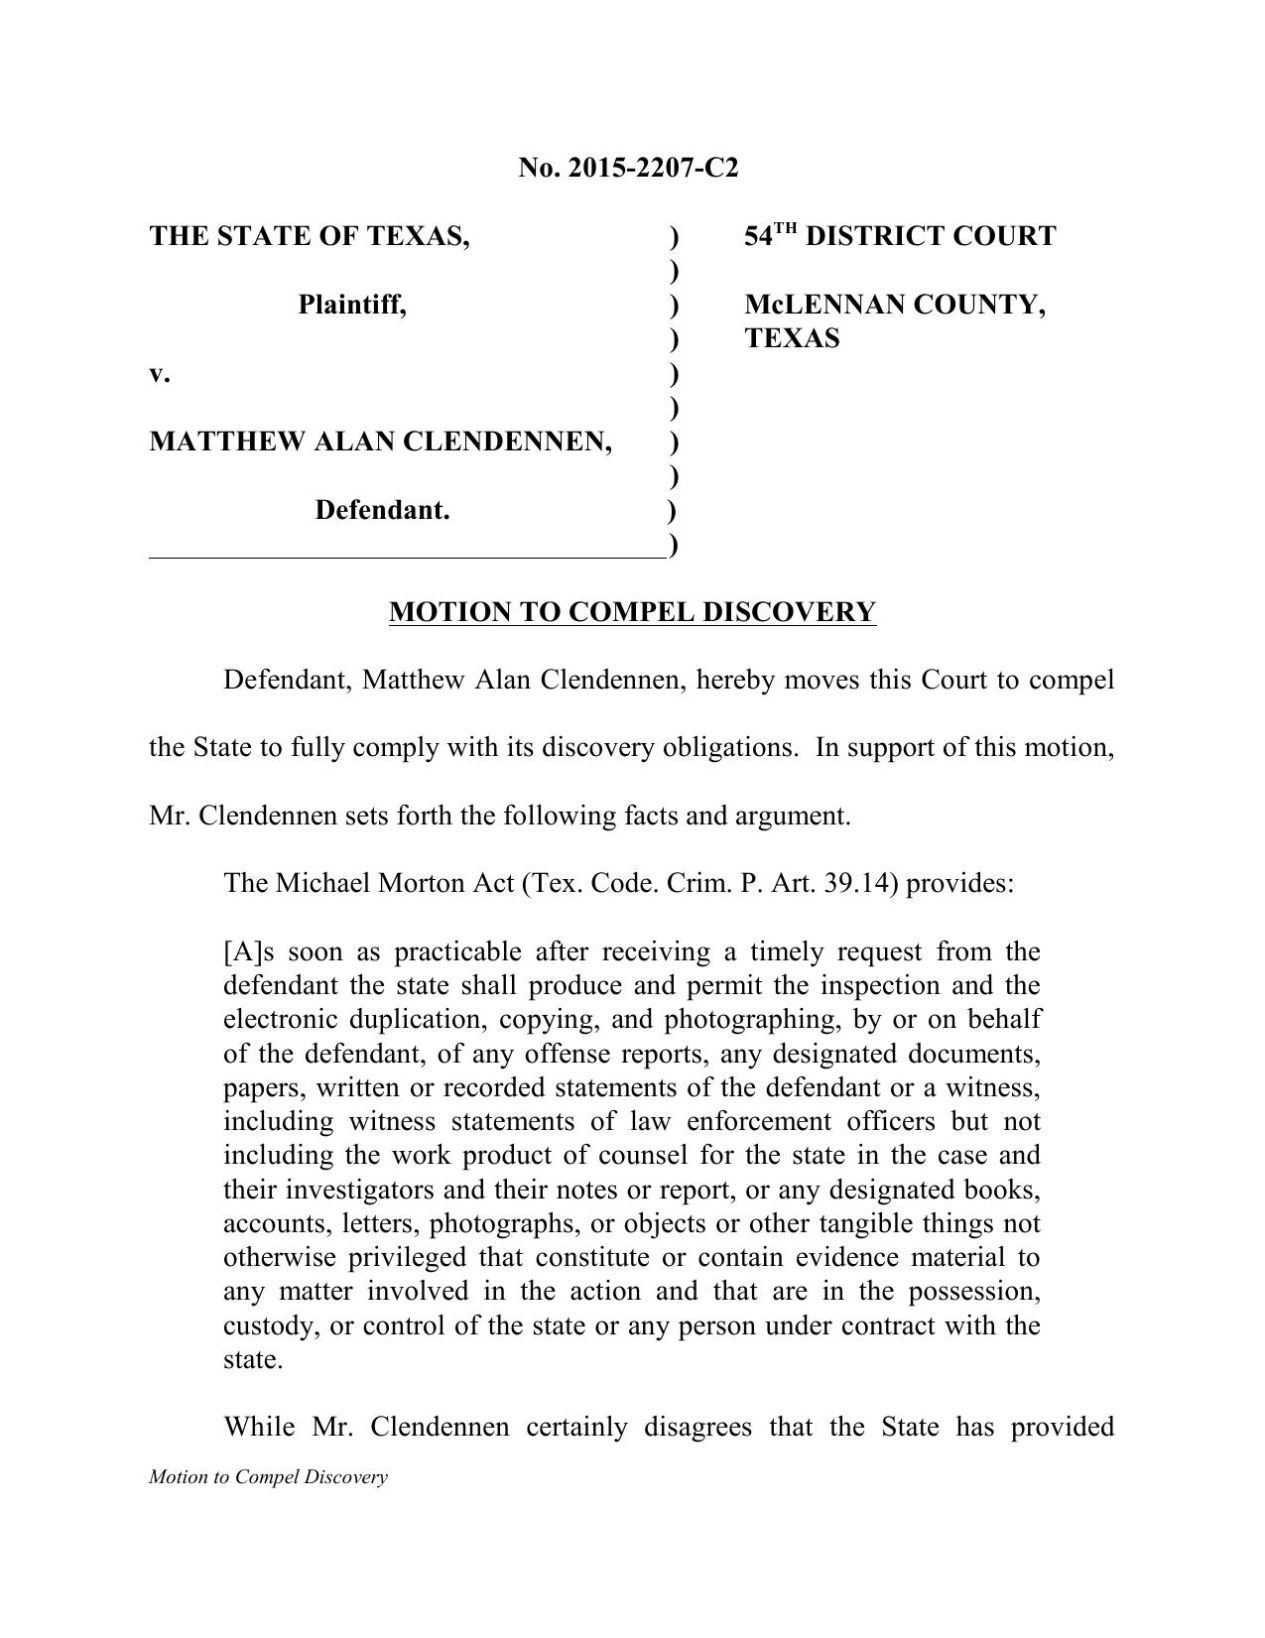 motion to compel discovery texas example